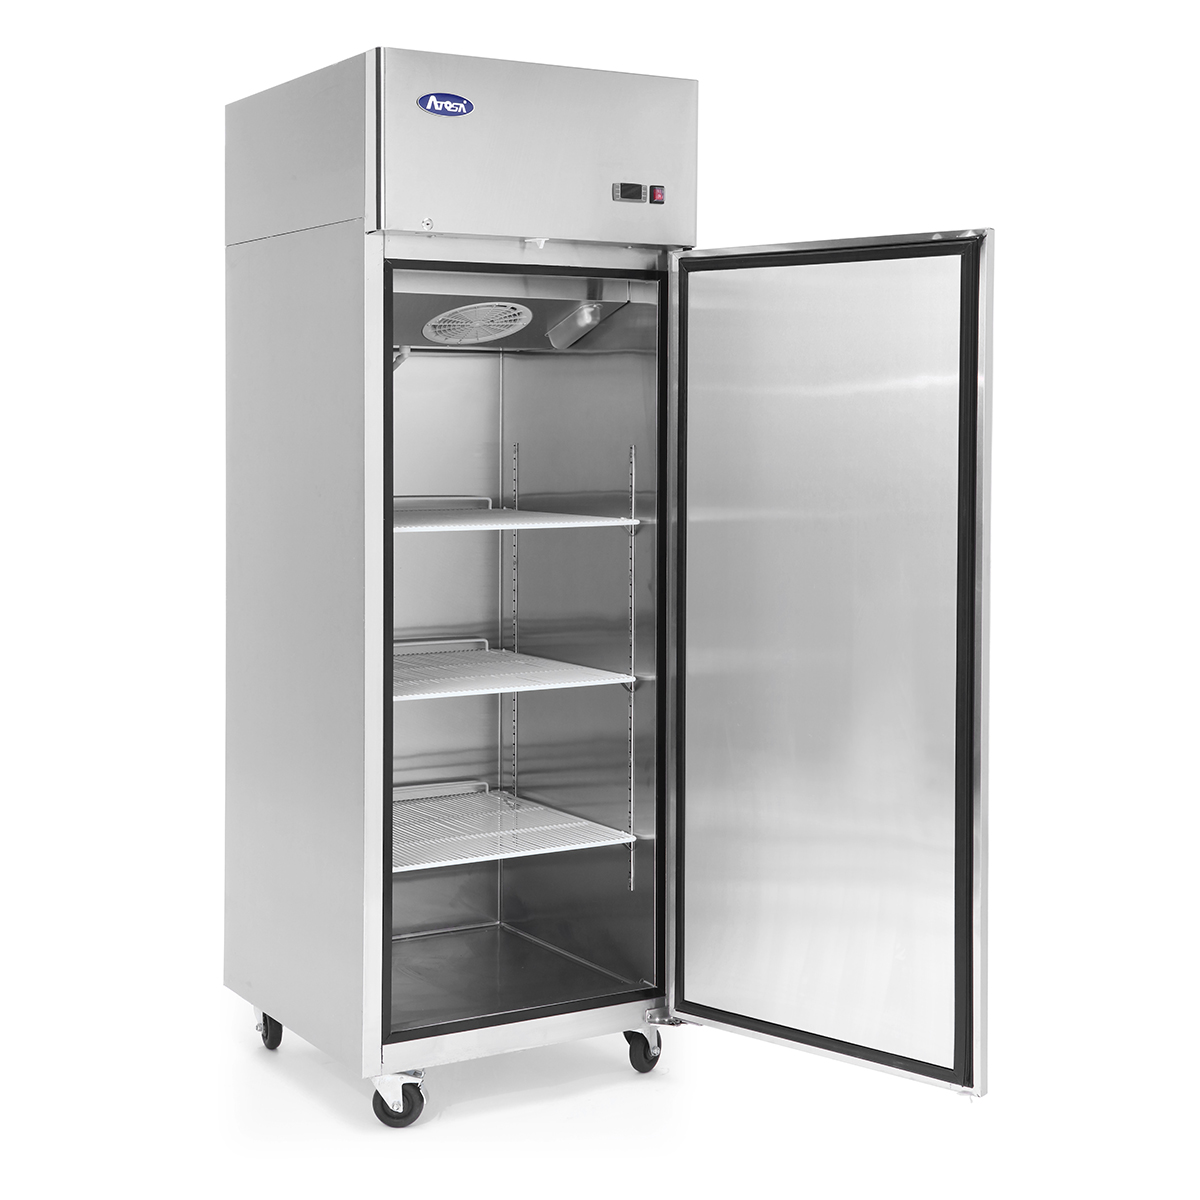 Atosa MBF8004GR Reach-In Top Mount Refrigerator 28-7/8"W x 33-1/4"D x 82-7/8"H with Locking Solid Door image 1